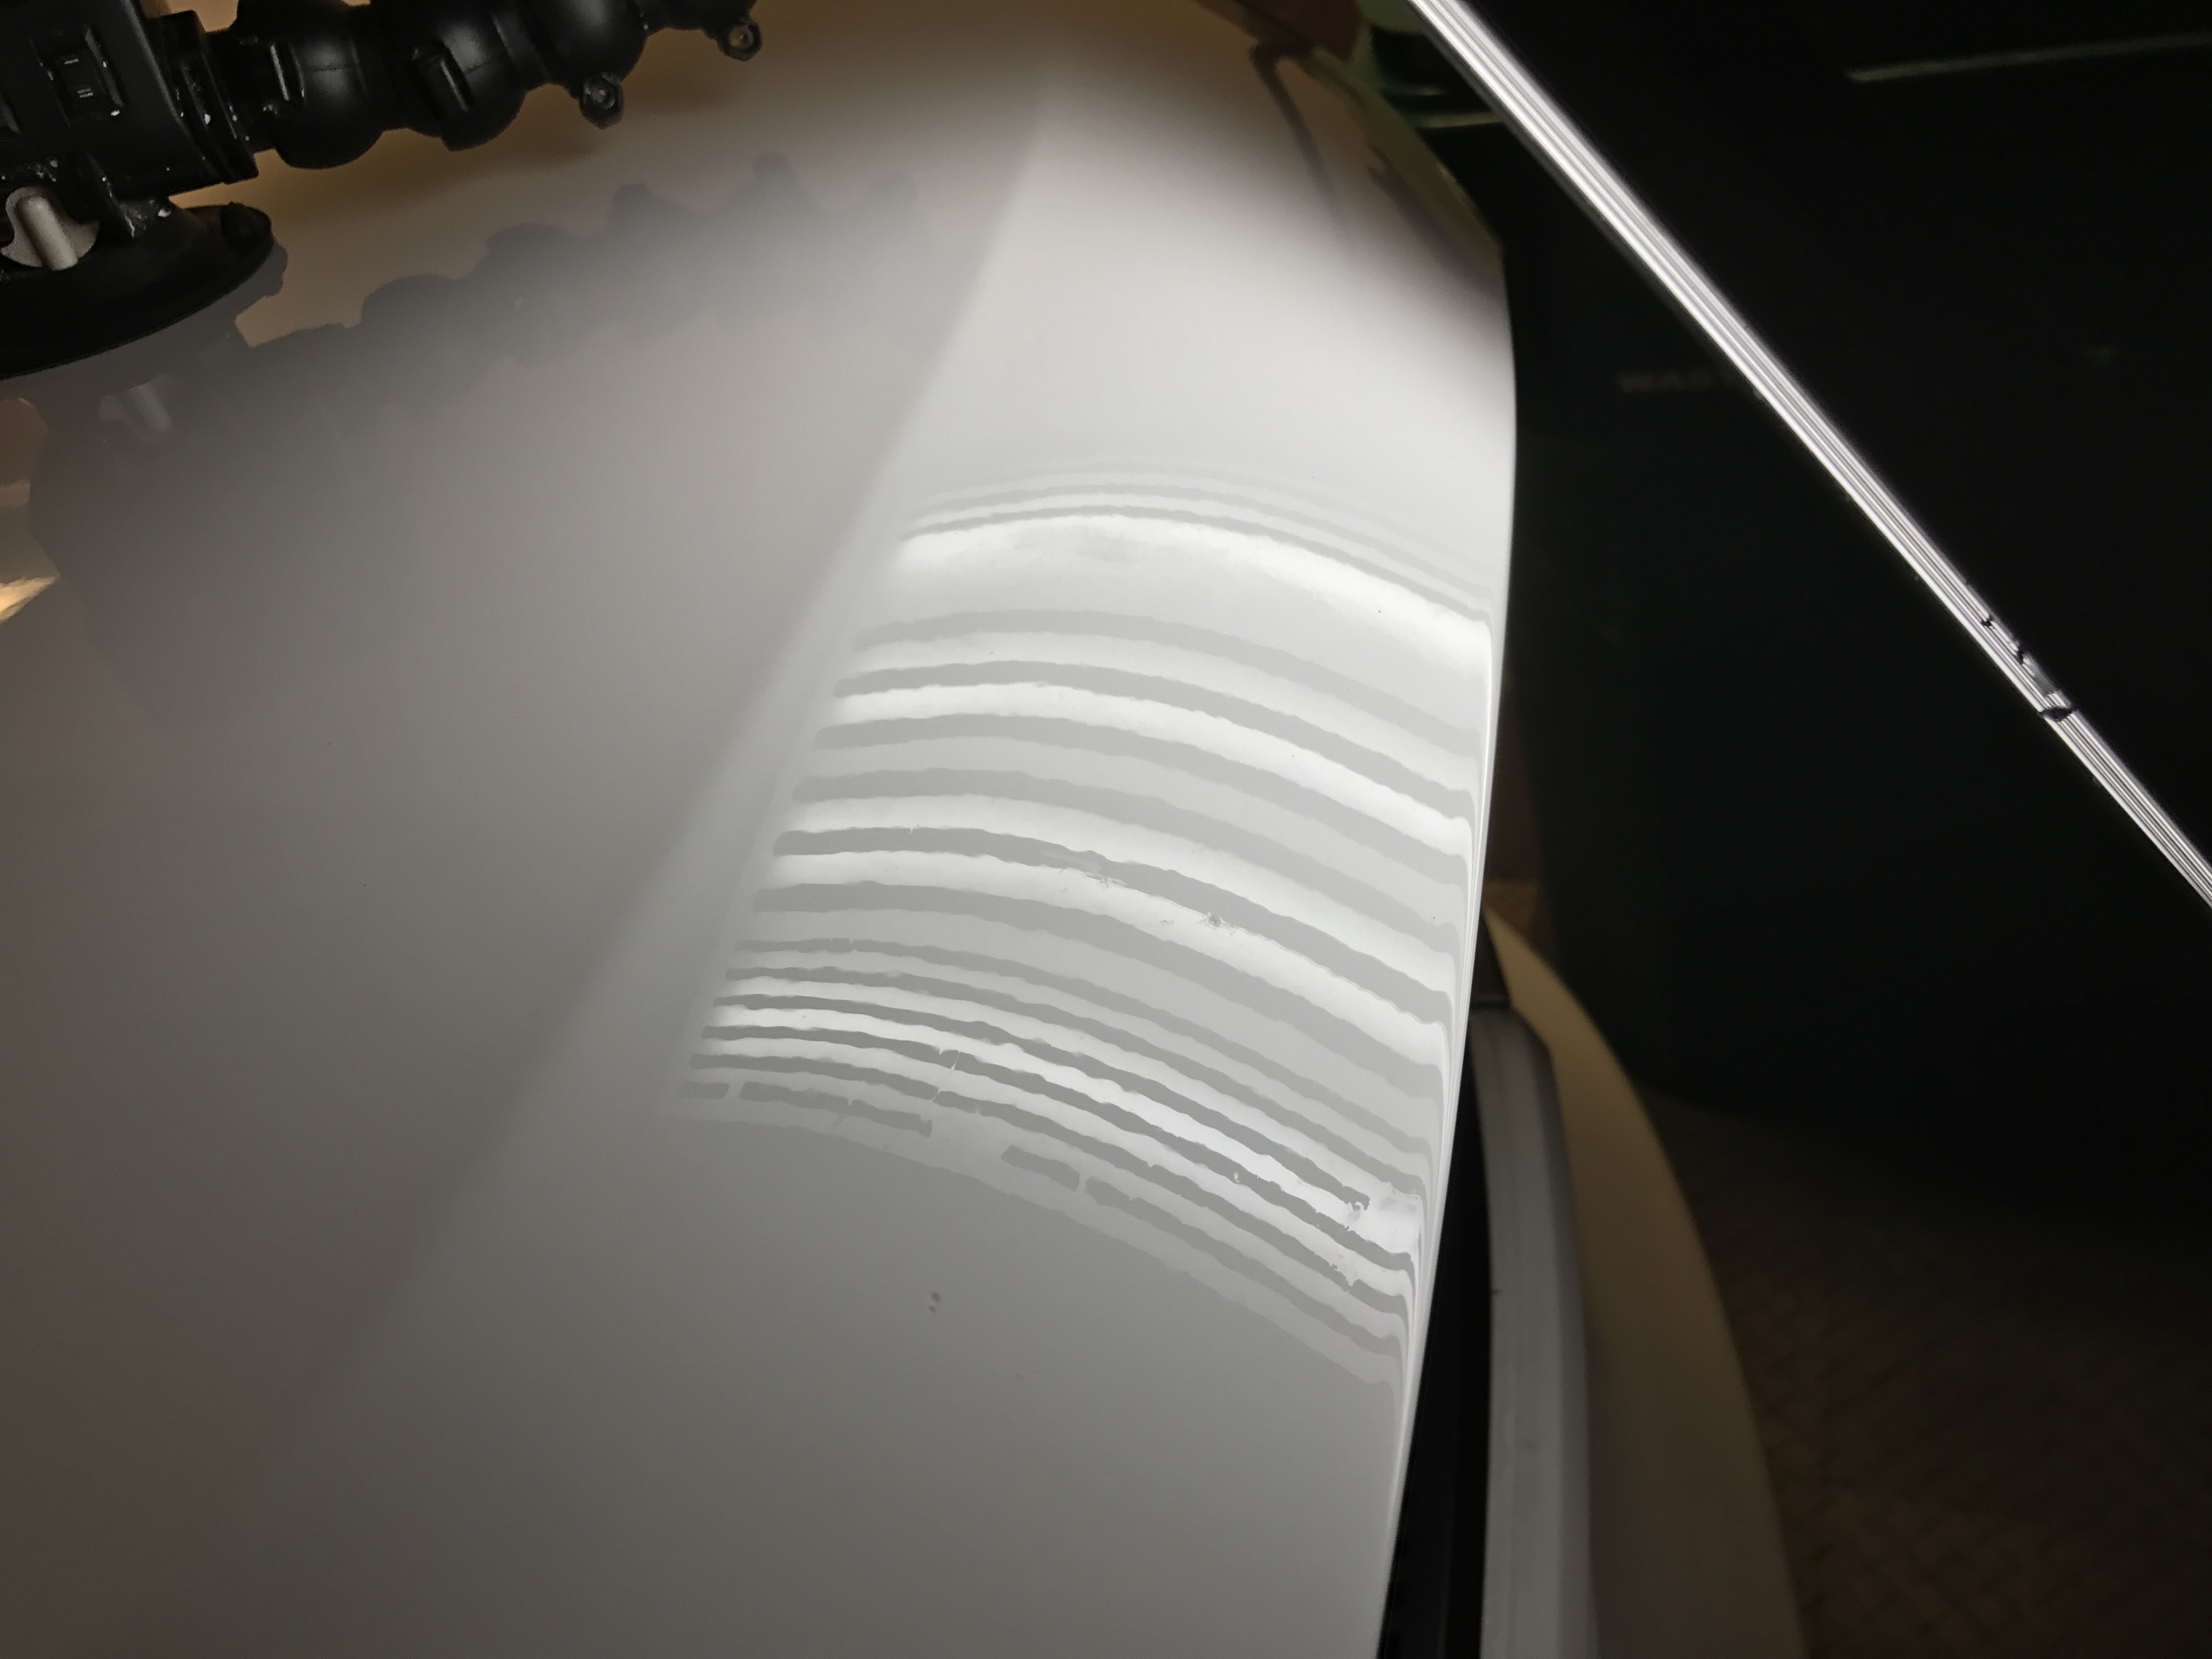 2015 Dodge Durango RT Paintless Dent Removal, Springfield IL https://217dent.com After Image of Hood Dents